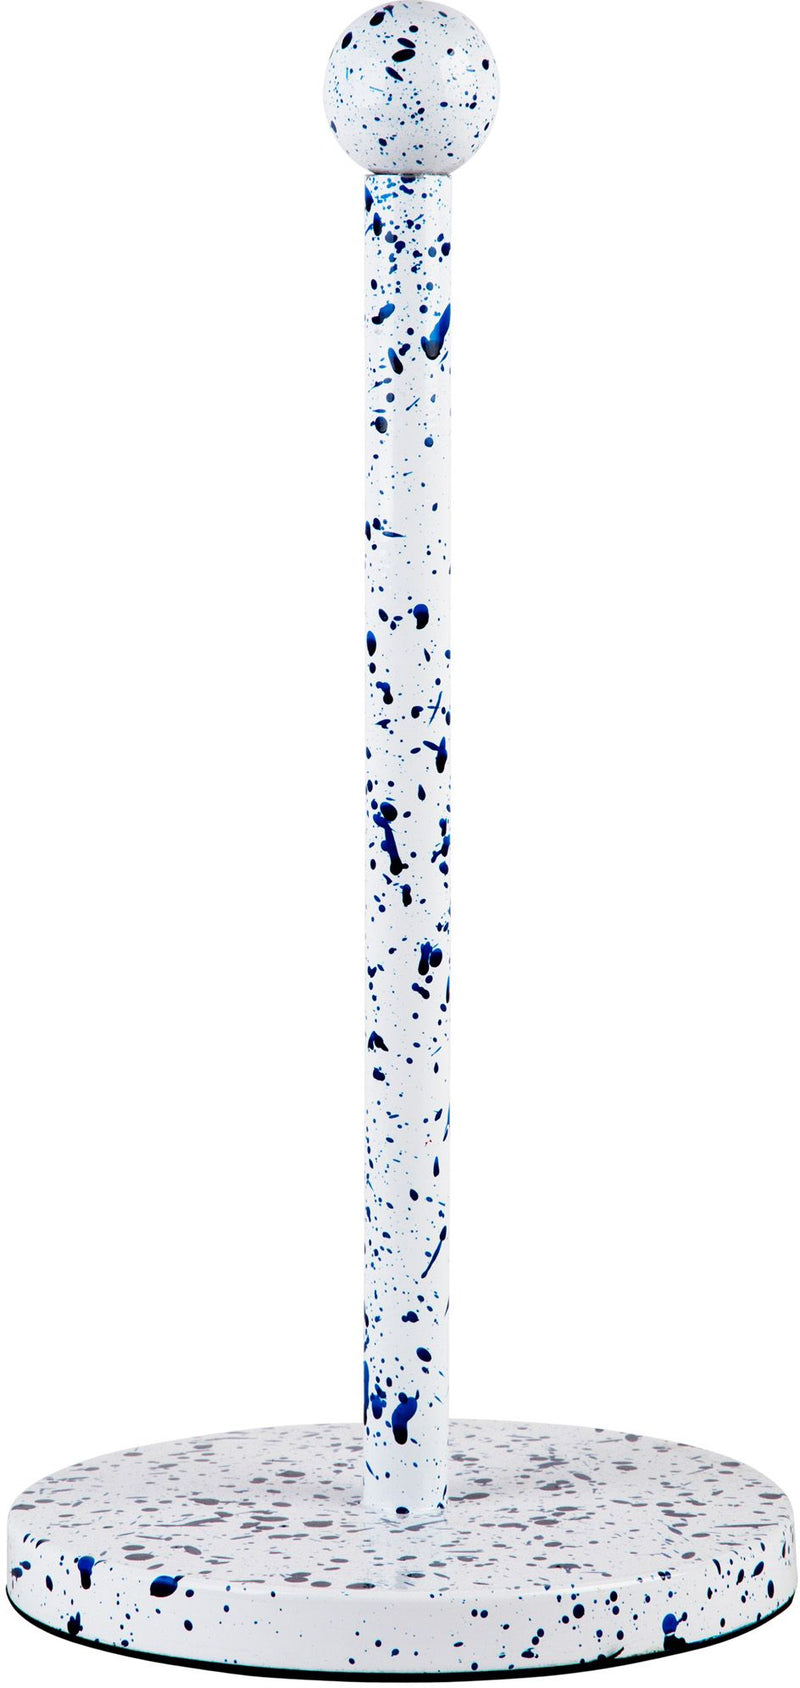 14"H WHITE WITH BLUE SPECKLED PAPER TOWEL HOLDER